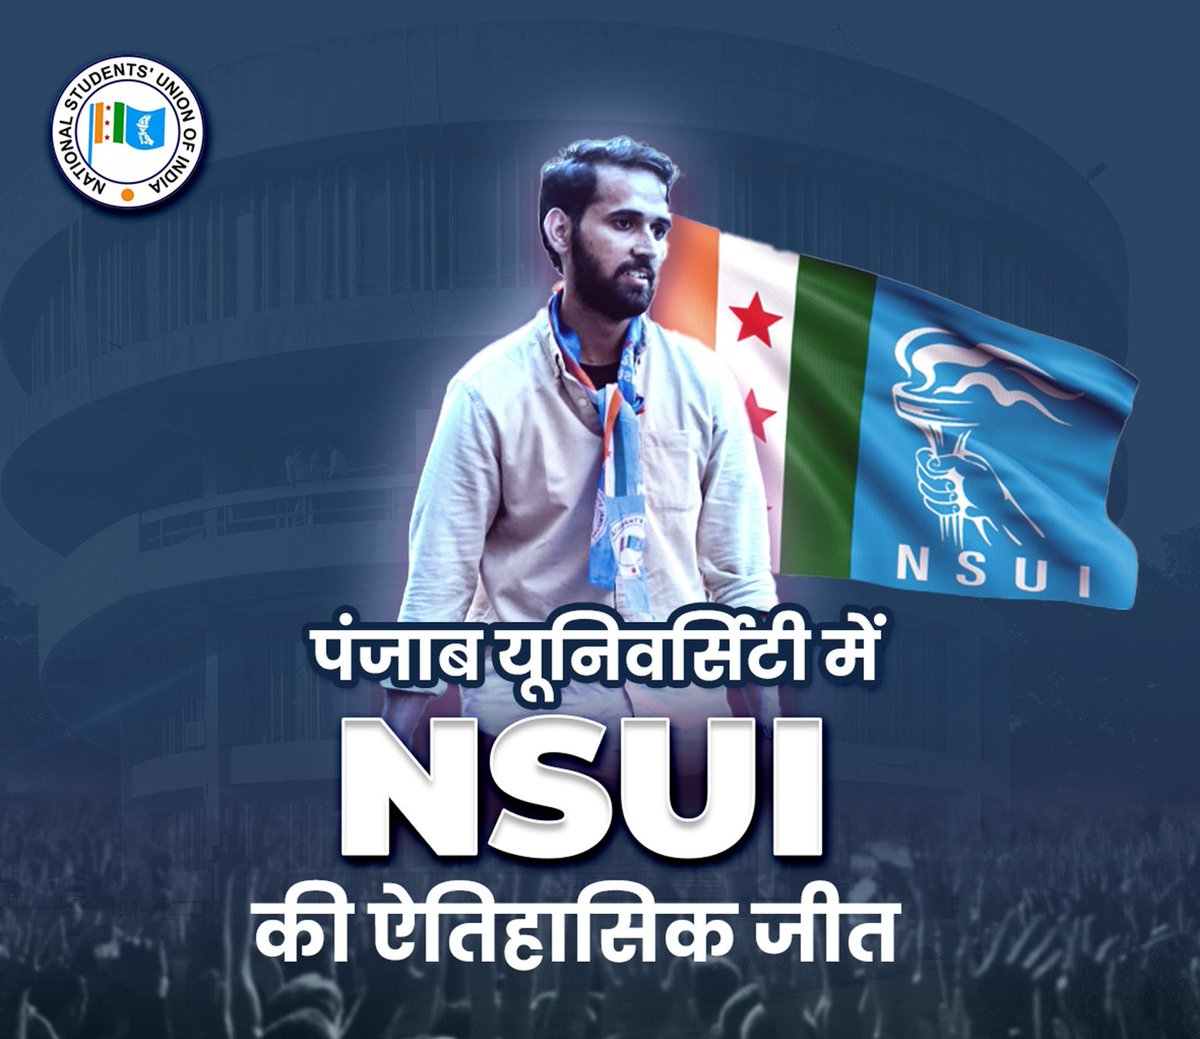 'Mohabbat Ki Dukaan' shines bright at Panjab University, as students choose love and peace over hate and division. Congratulations to NSUI activists for a well-deserved victory! ✌️ #PanjabUniversity #StudentPower